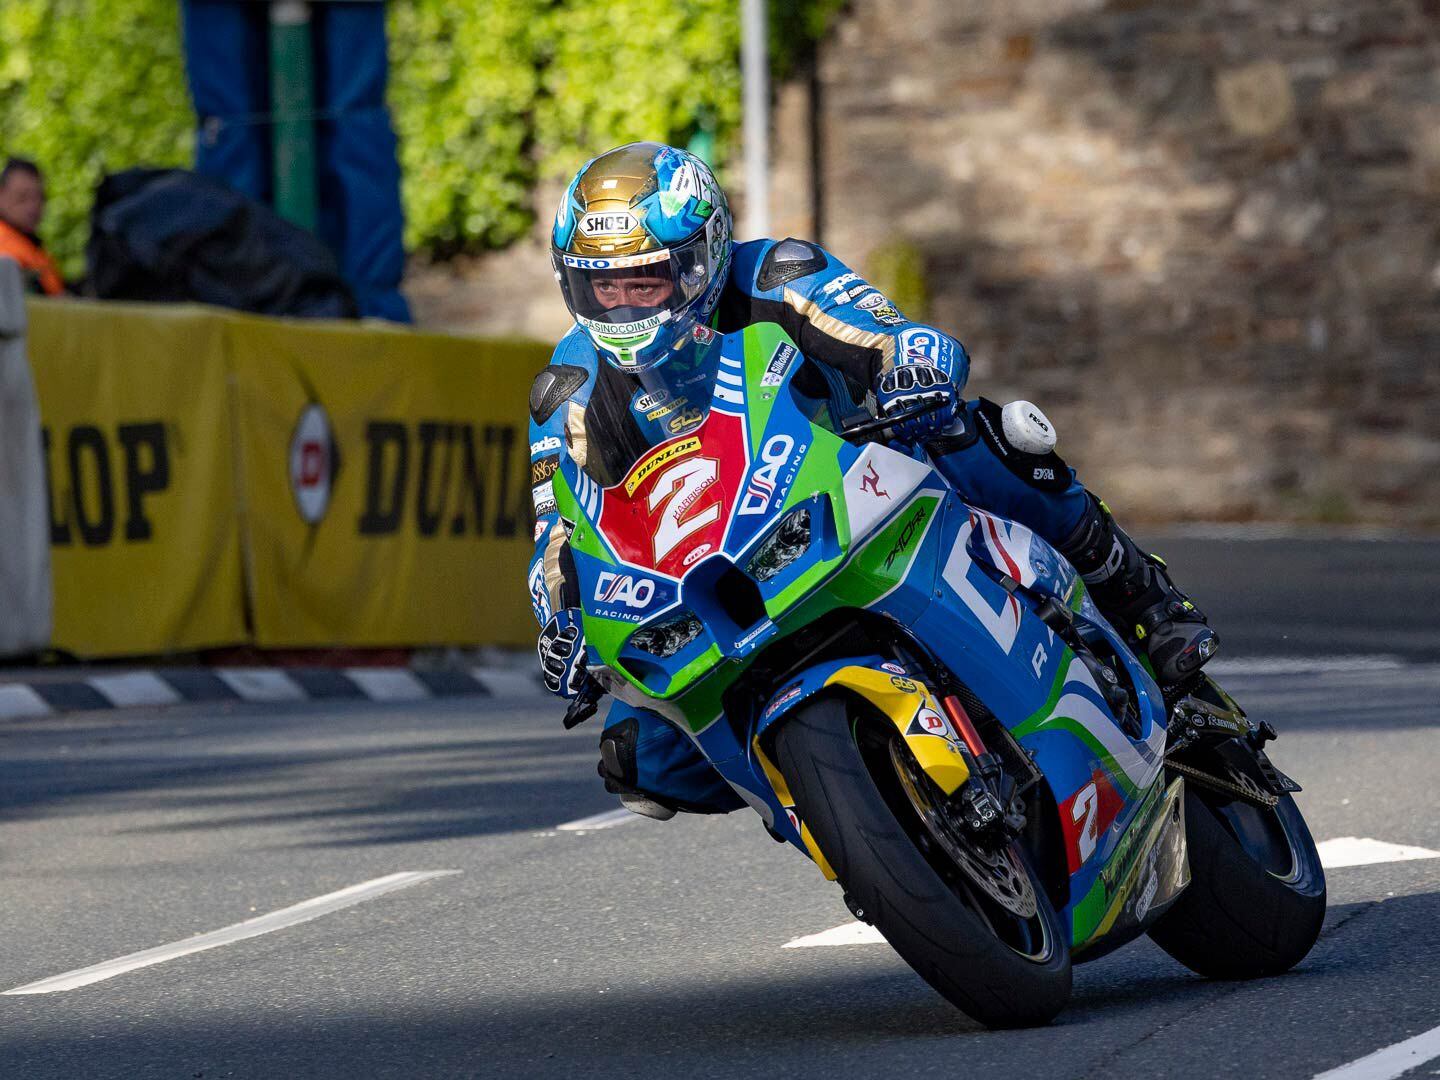 Dean Harrison, winner of the 2019 Senior TT, focuses on the exit of the turn and upcoming straight from the saddle of his DAO Racing Kawasaki 1000 Superstock.